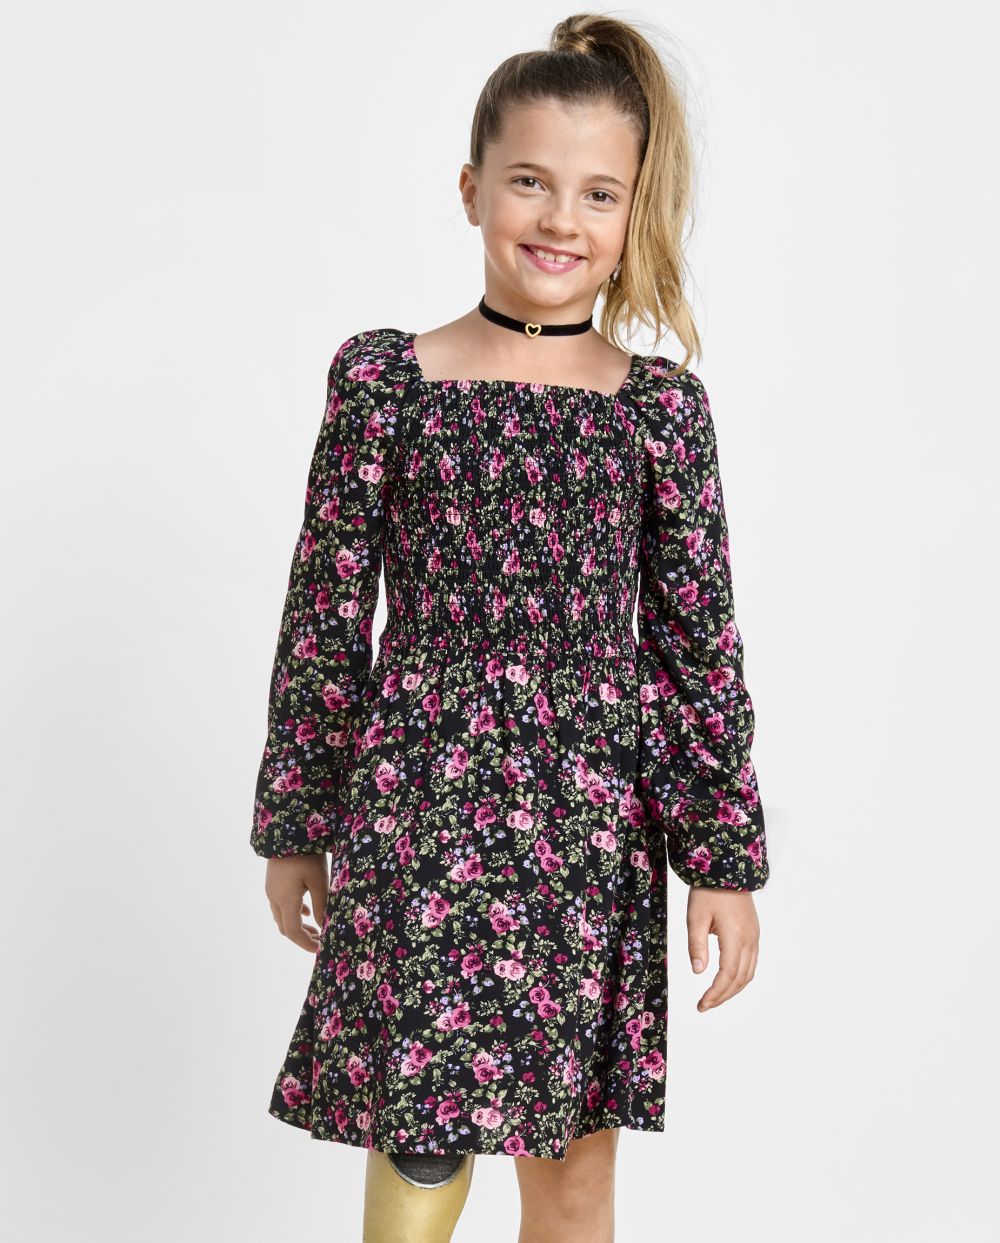 Girls Above the Knee Floral Print Rayon Long Sleeves Smocked Square Neck Dress